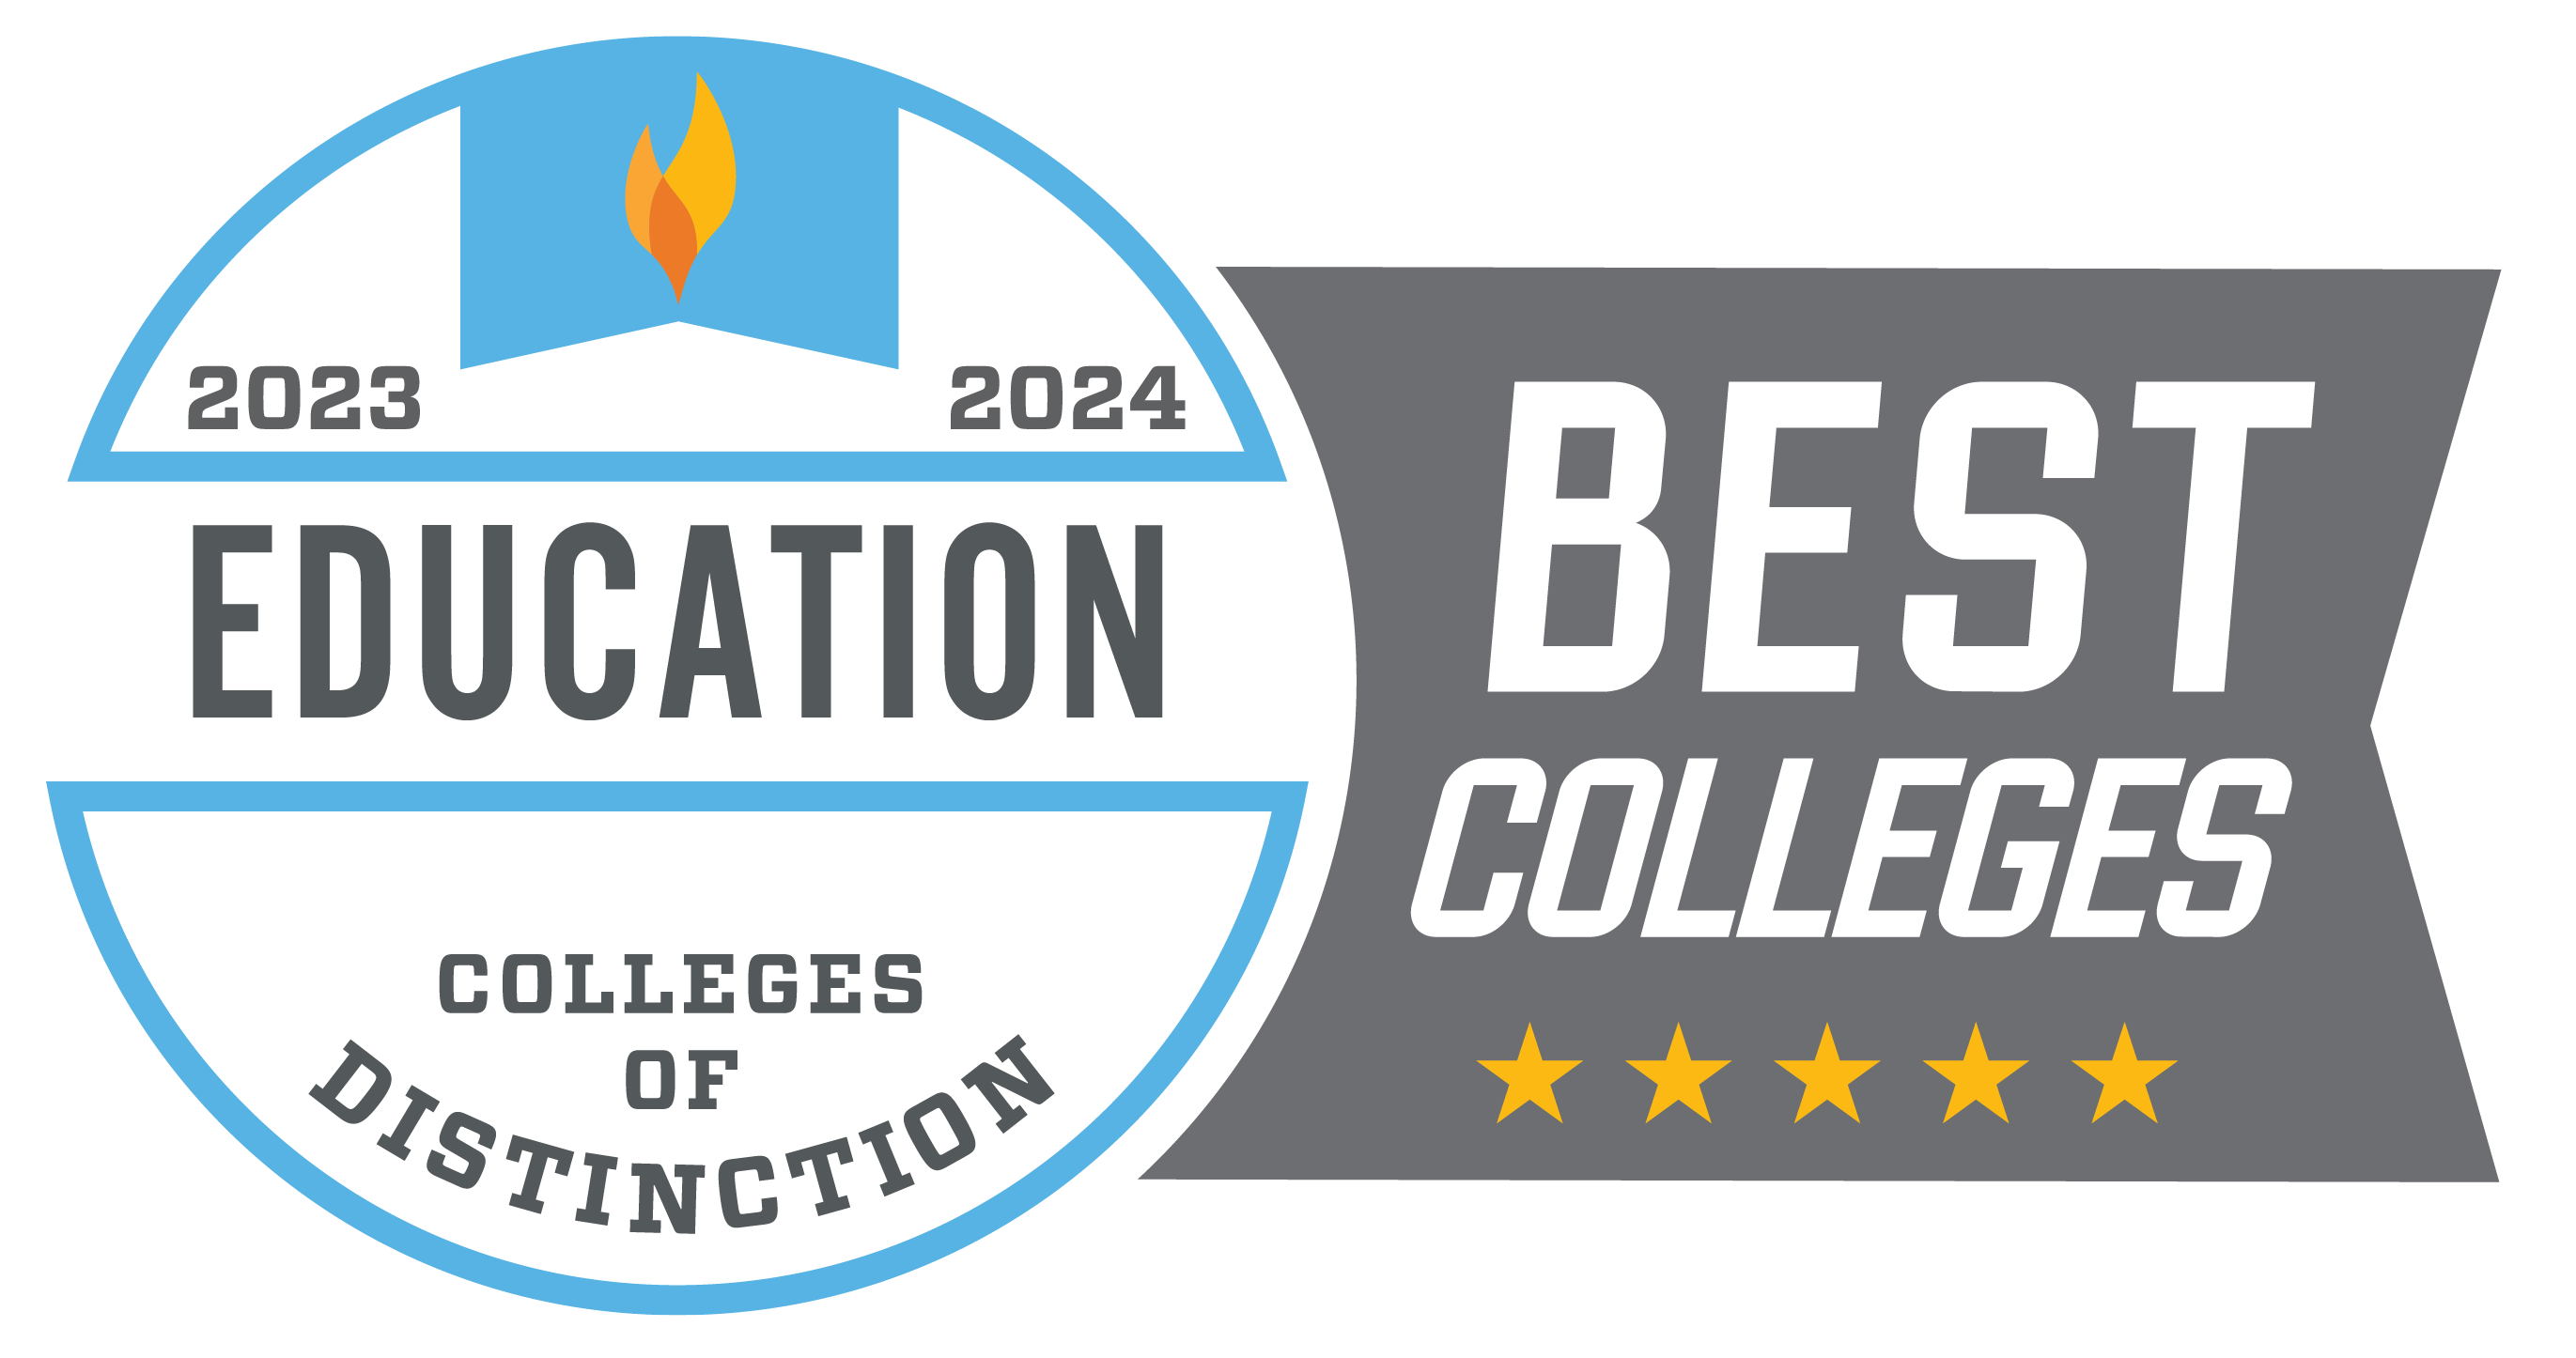 Colleges of Distinction Badge for Best Education Colleges